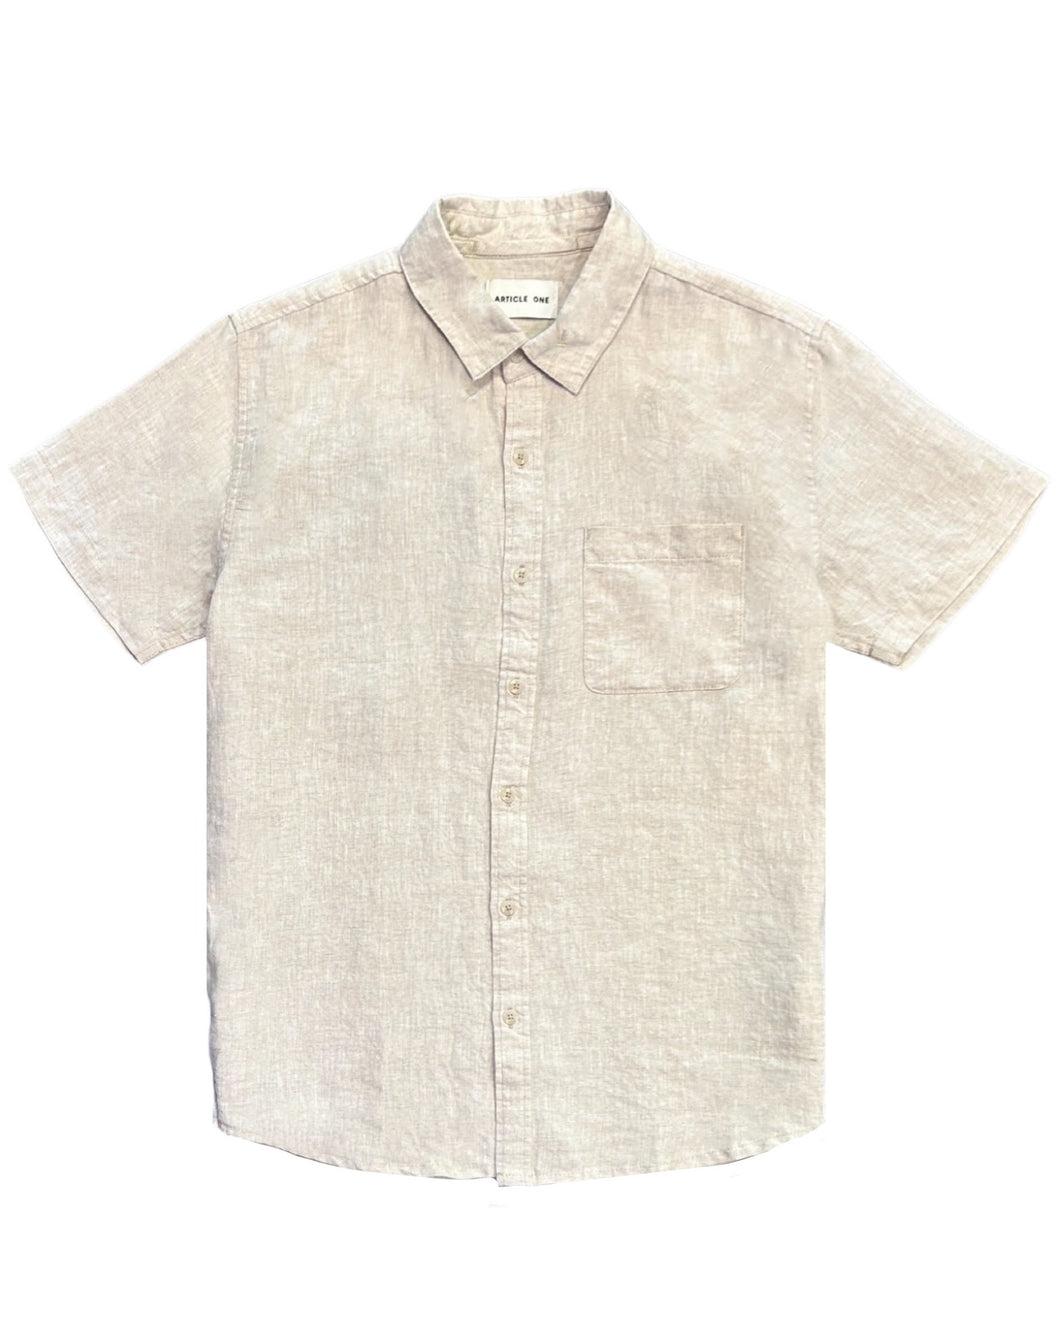 Article One Nero Linen Shirt in Natural Marle ⏐ Multiple Sizes / New